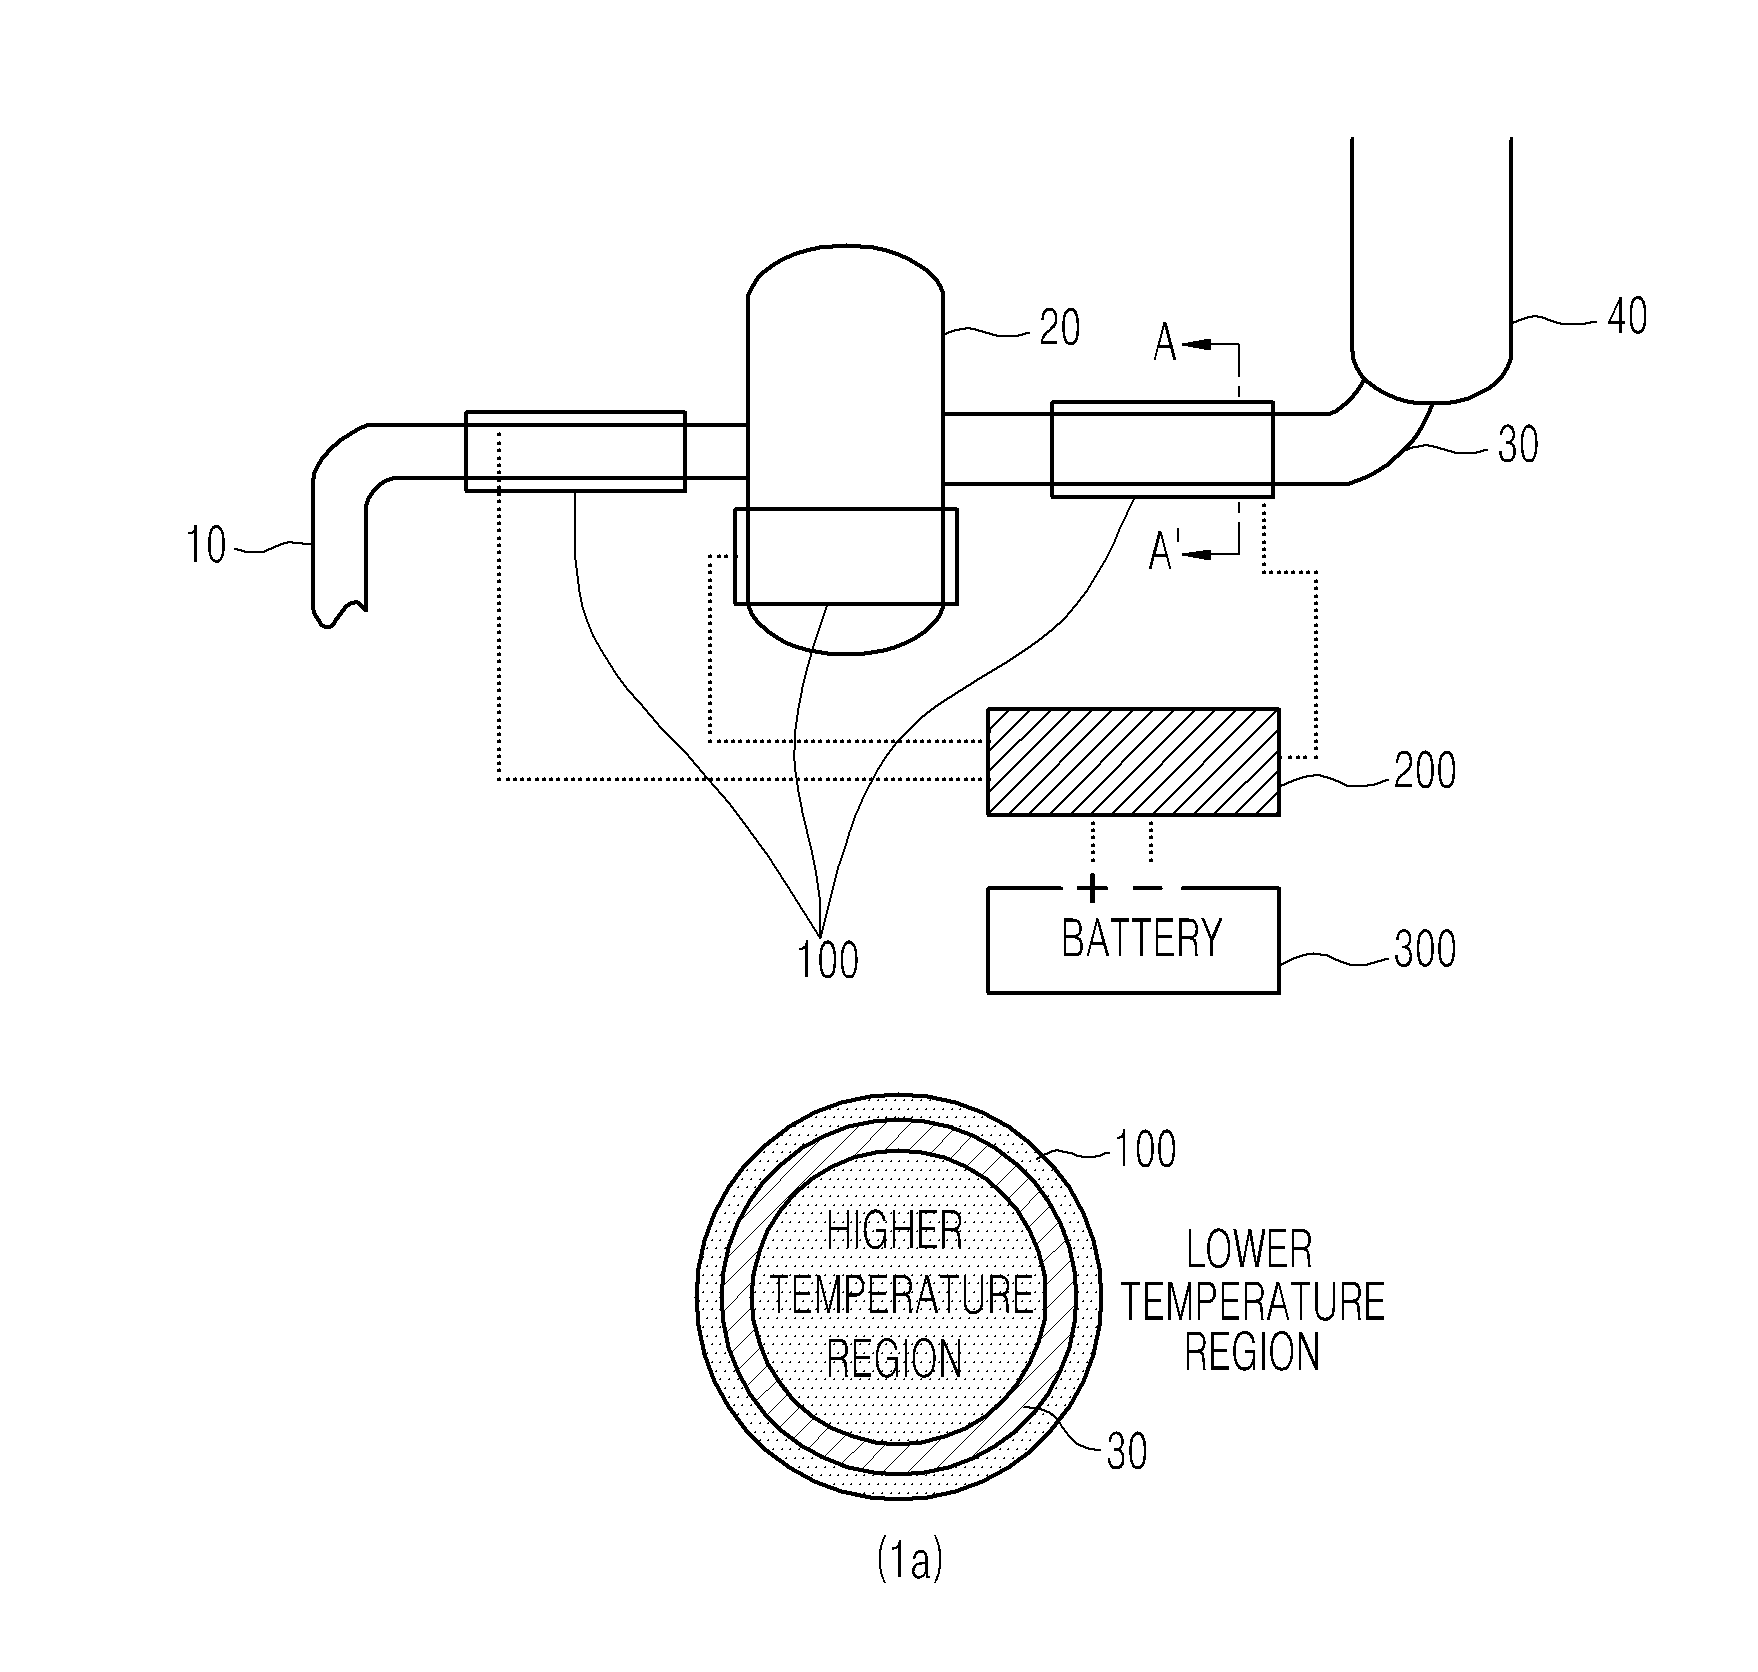 Apparatus for charging emergency battery using thermoelectric generation device in nuclear power plant